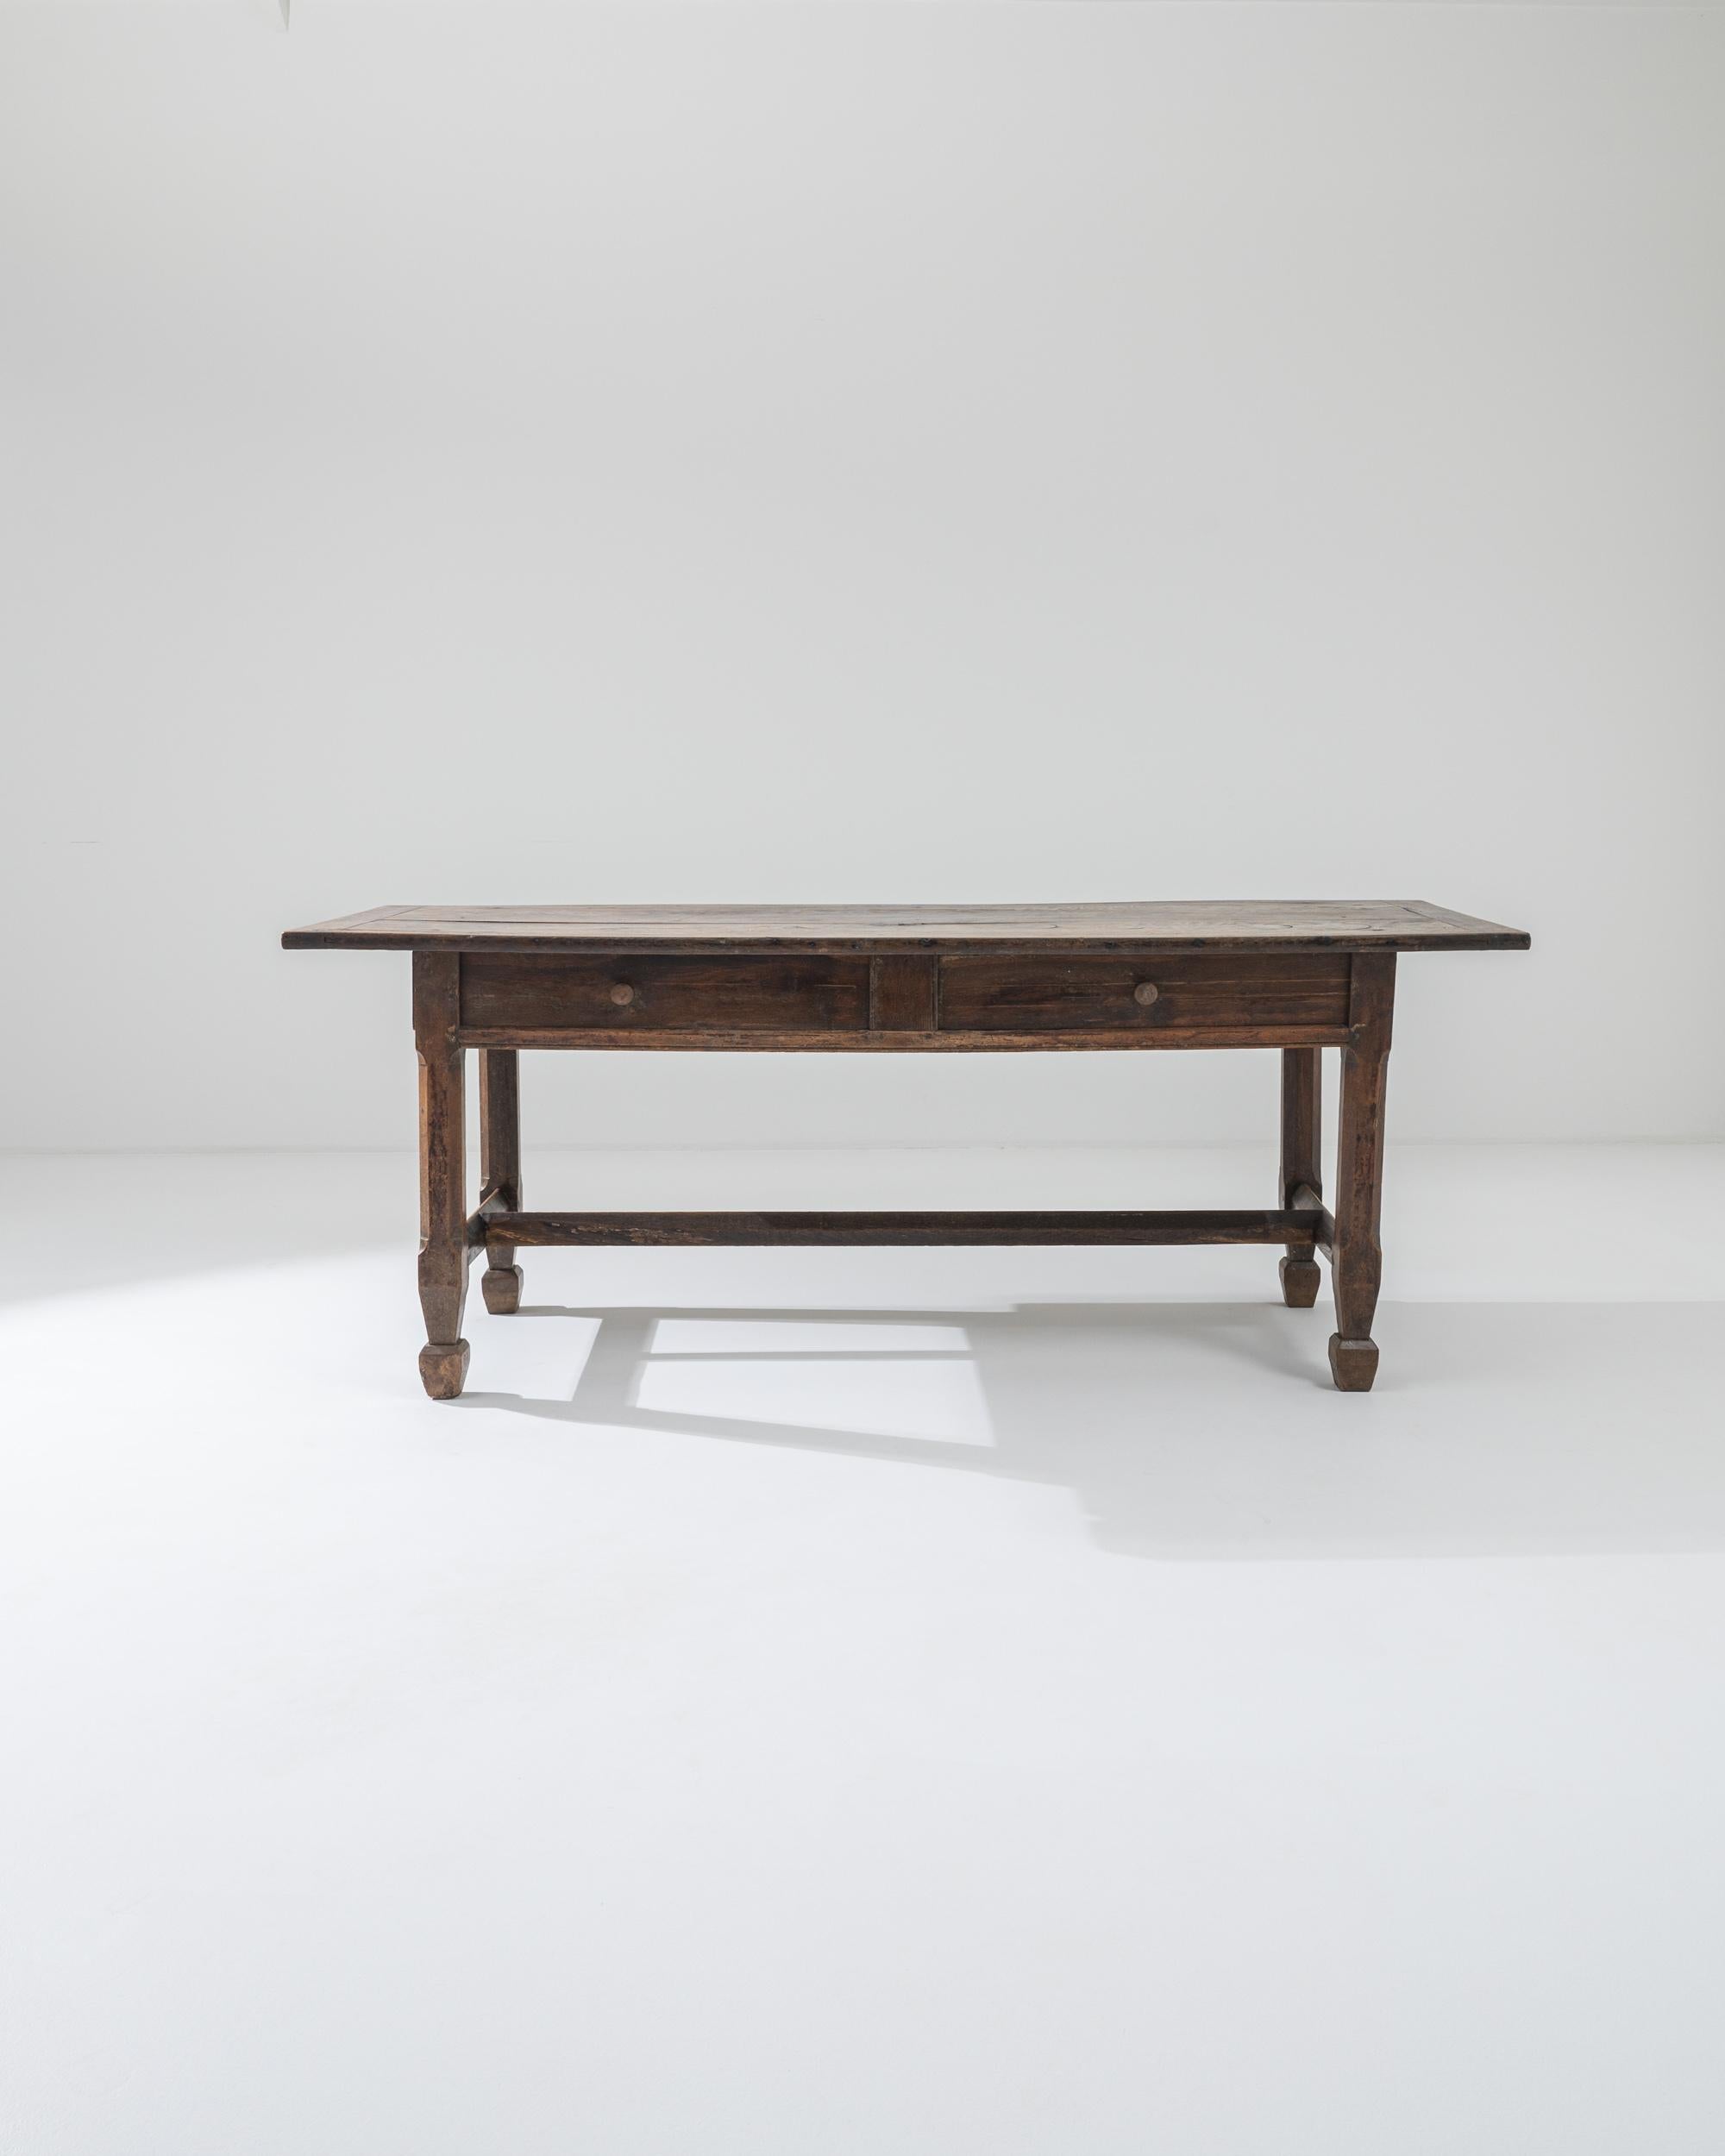 This antique wooden table combines a Provincial silhouette with an attractive original patina. Made in France in the 1800s, the simple rectilinear shape is enlivened by subtle details—the gentle contour of the stretcher blocks; the rugged taper of